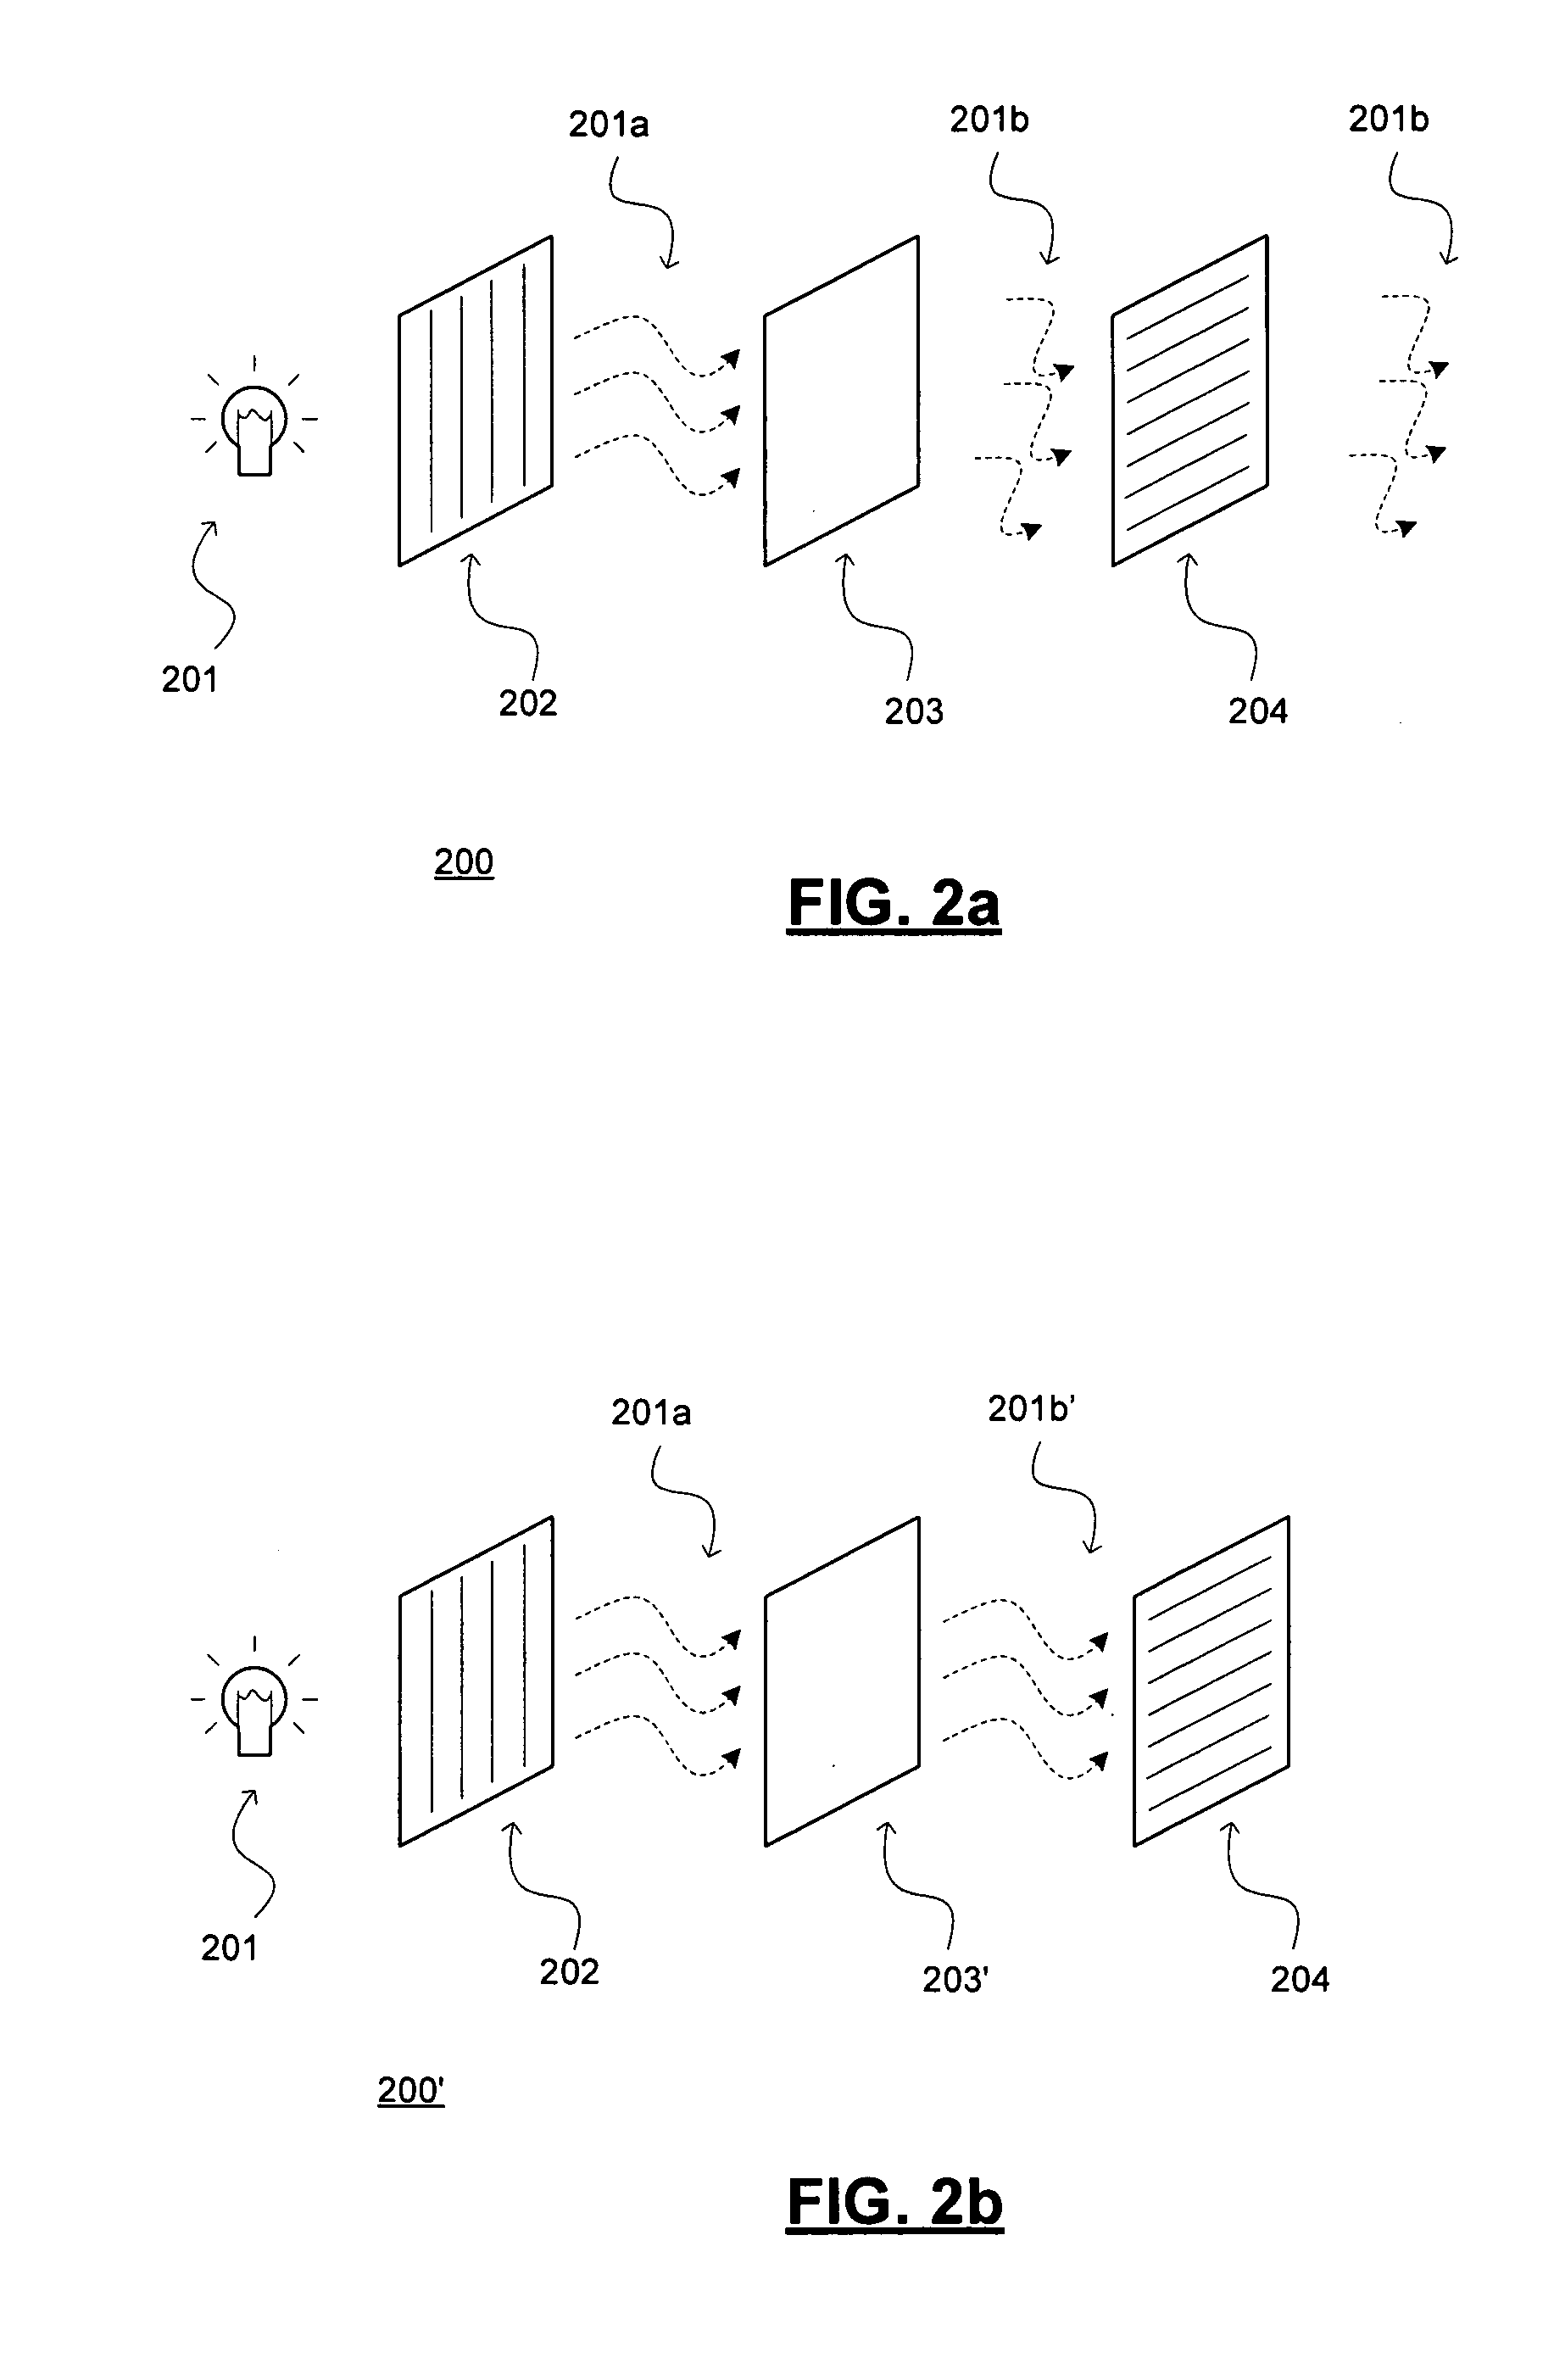 Two-panel liquid crystal system with circular polarization and polarizer glasses suitable for three dimensional imaging